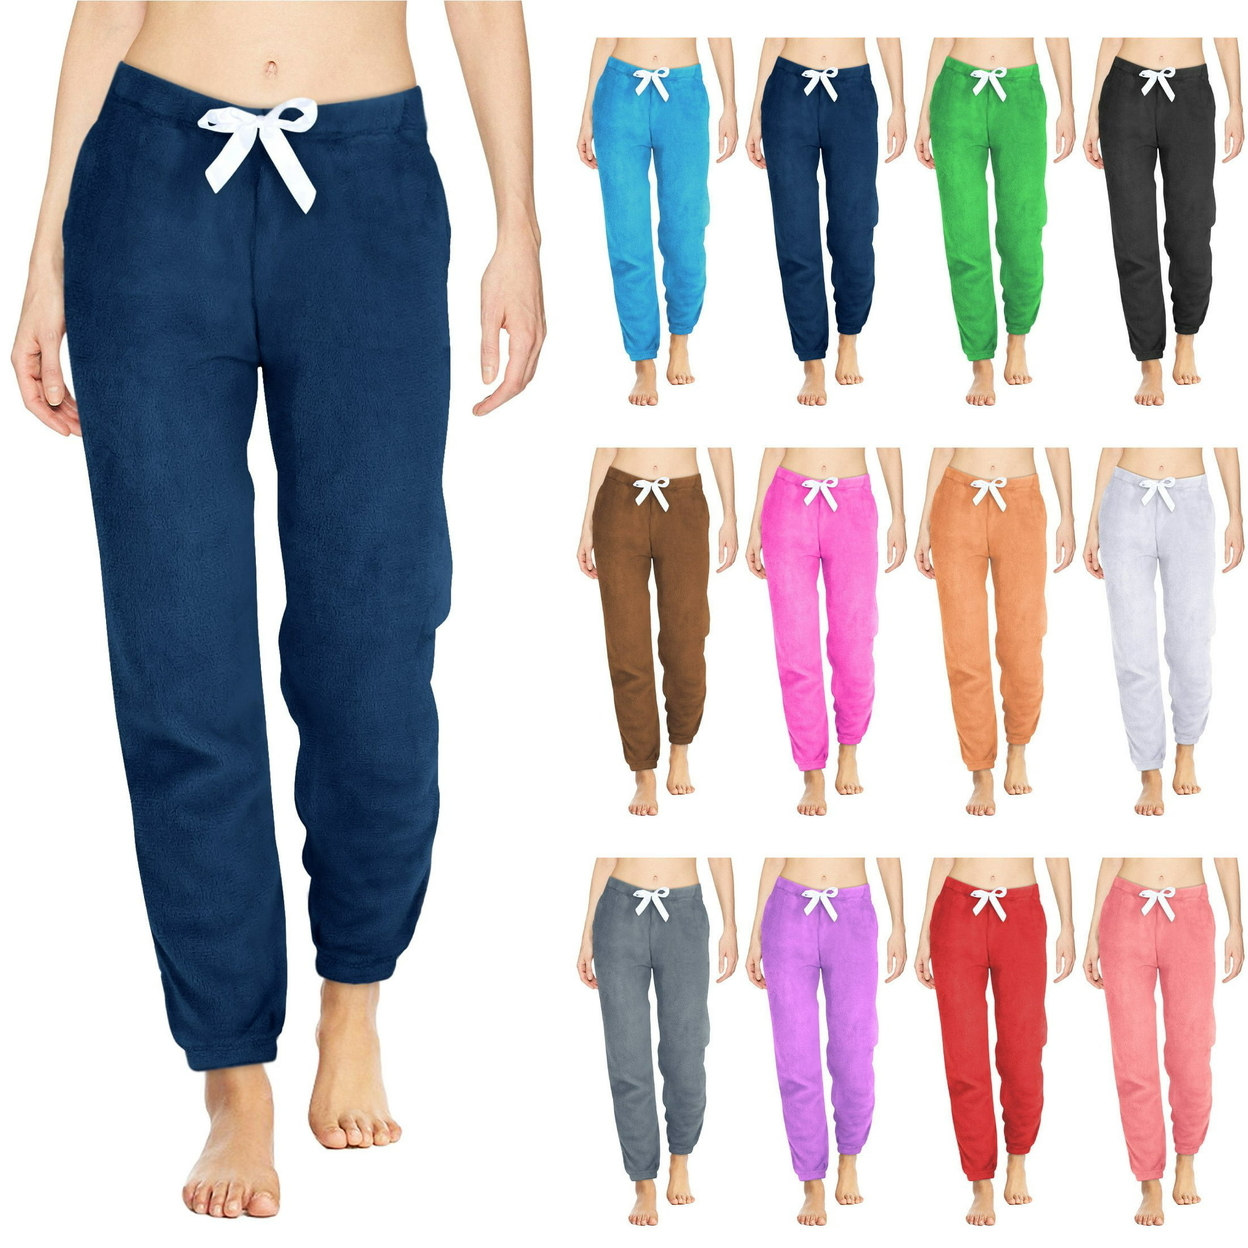 Multi-Pack: Women's Solid & Printed Ultra-Soft Comfy Stretch Micro-Fleece Pajama Lounge Pants - 1-pack, Small, Shapes